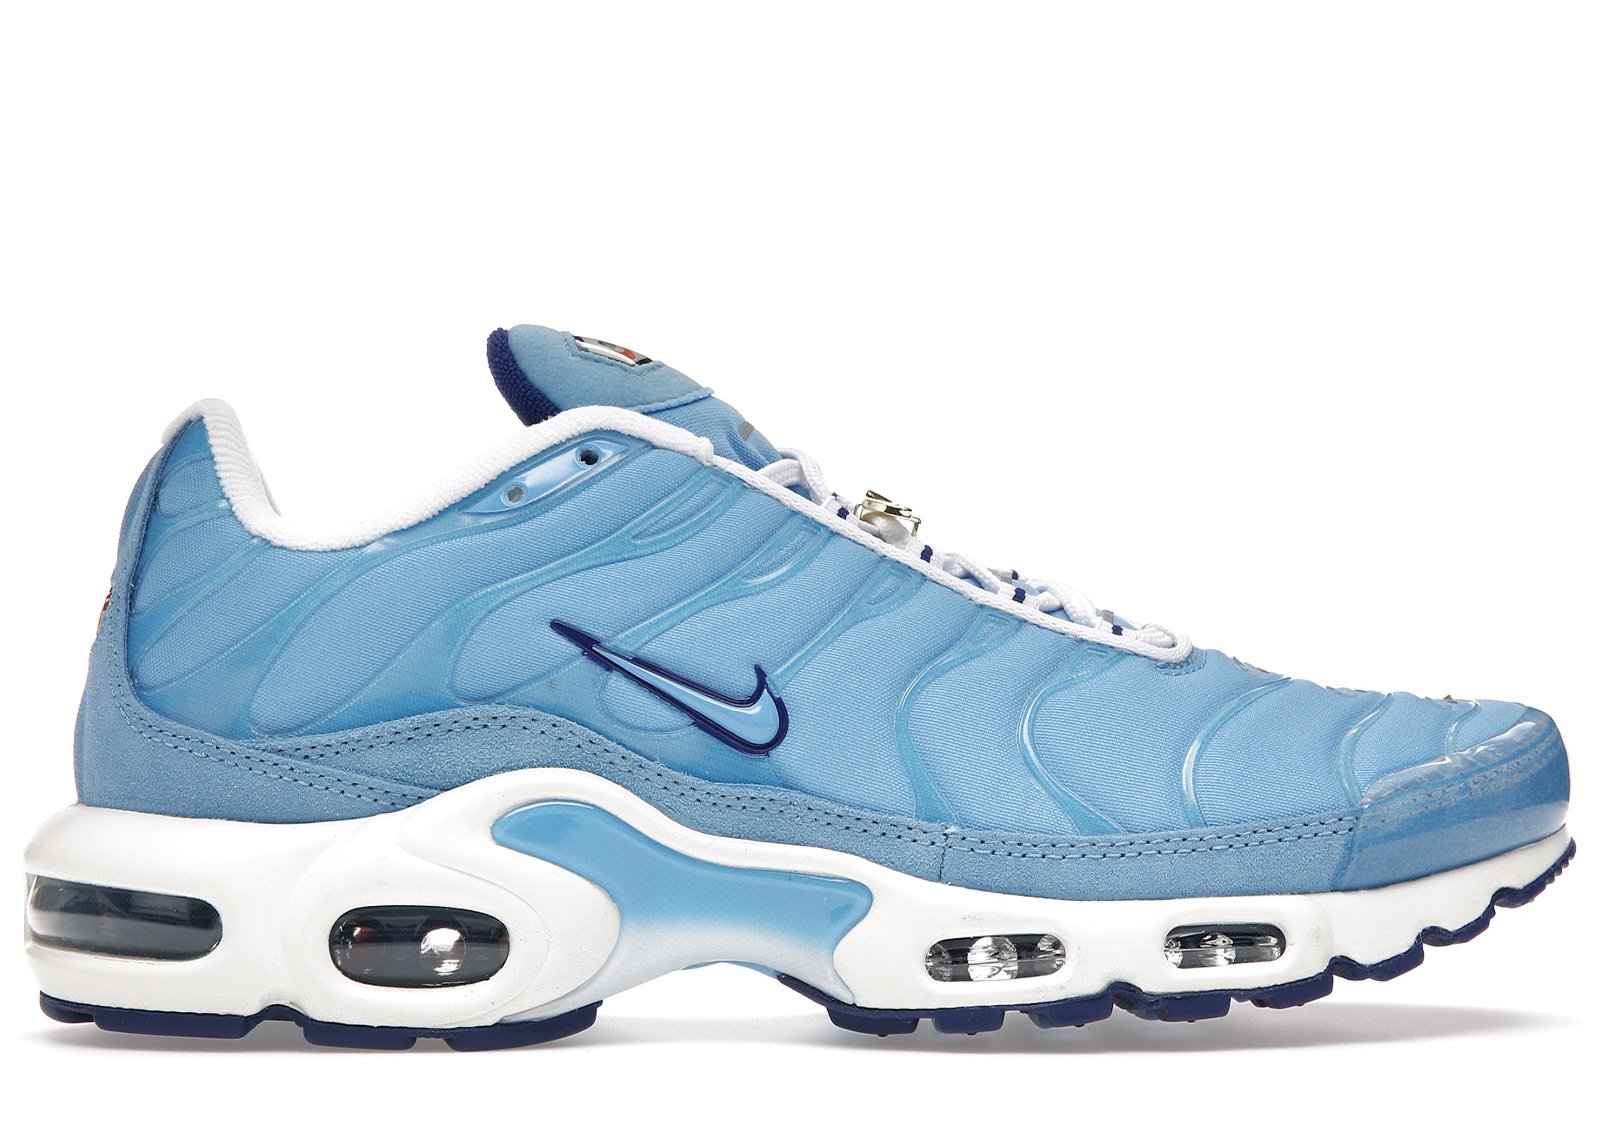 Air Max Plus "First Use University Blue"